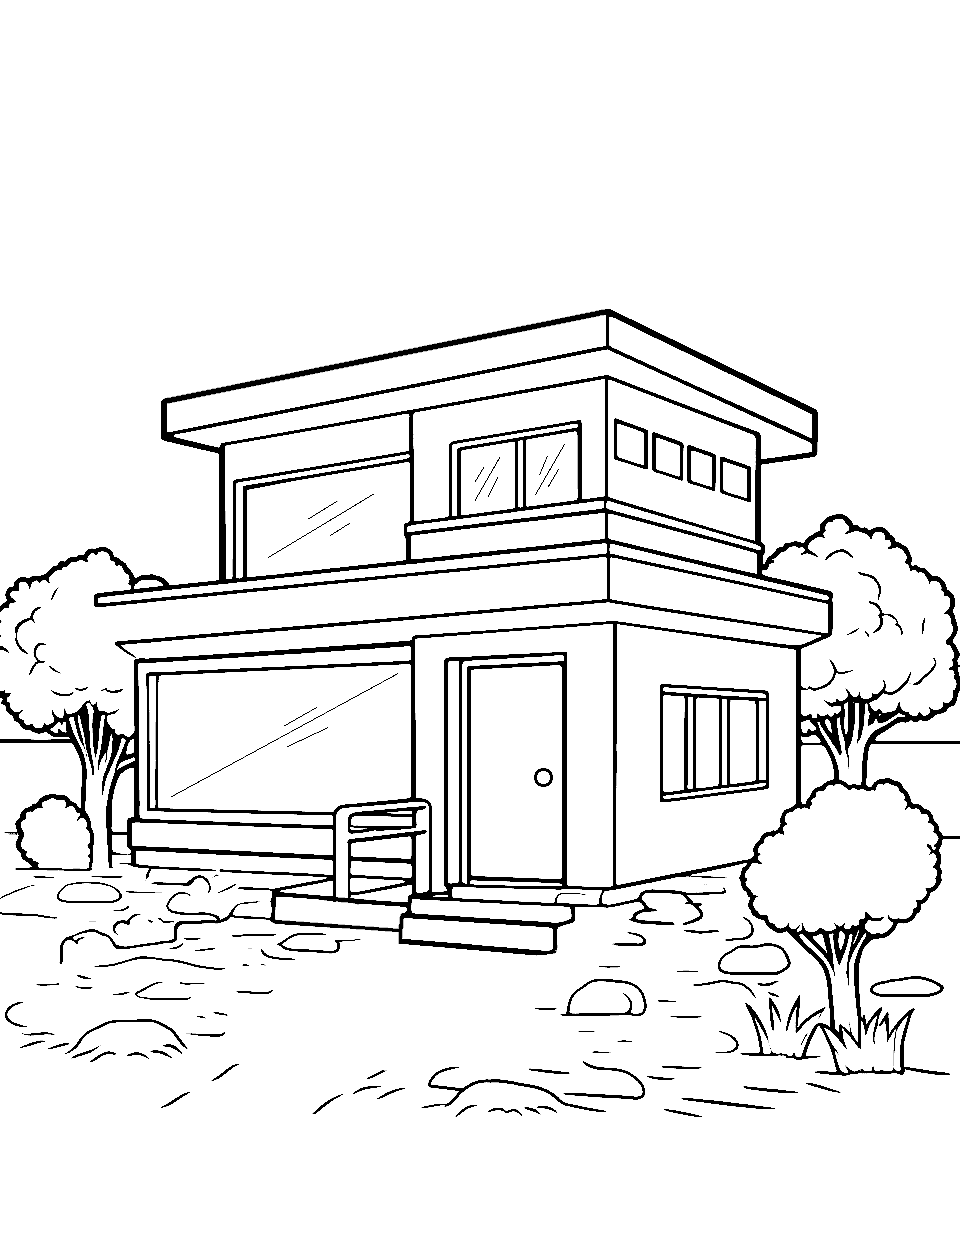 Modern Architectural Wonder Coloring Page - A sleek, modern house with large windows.